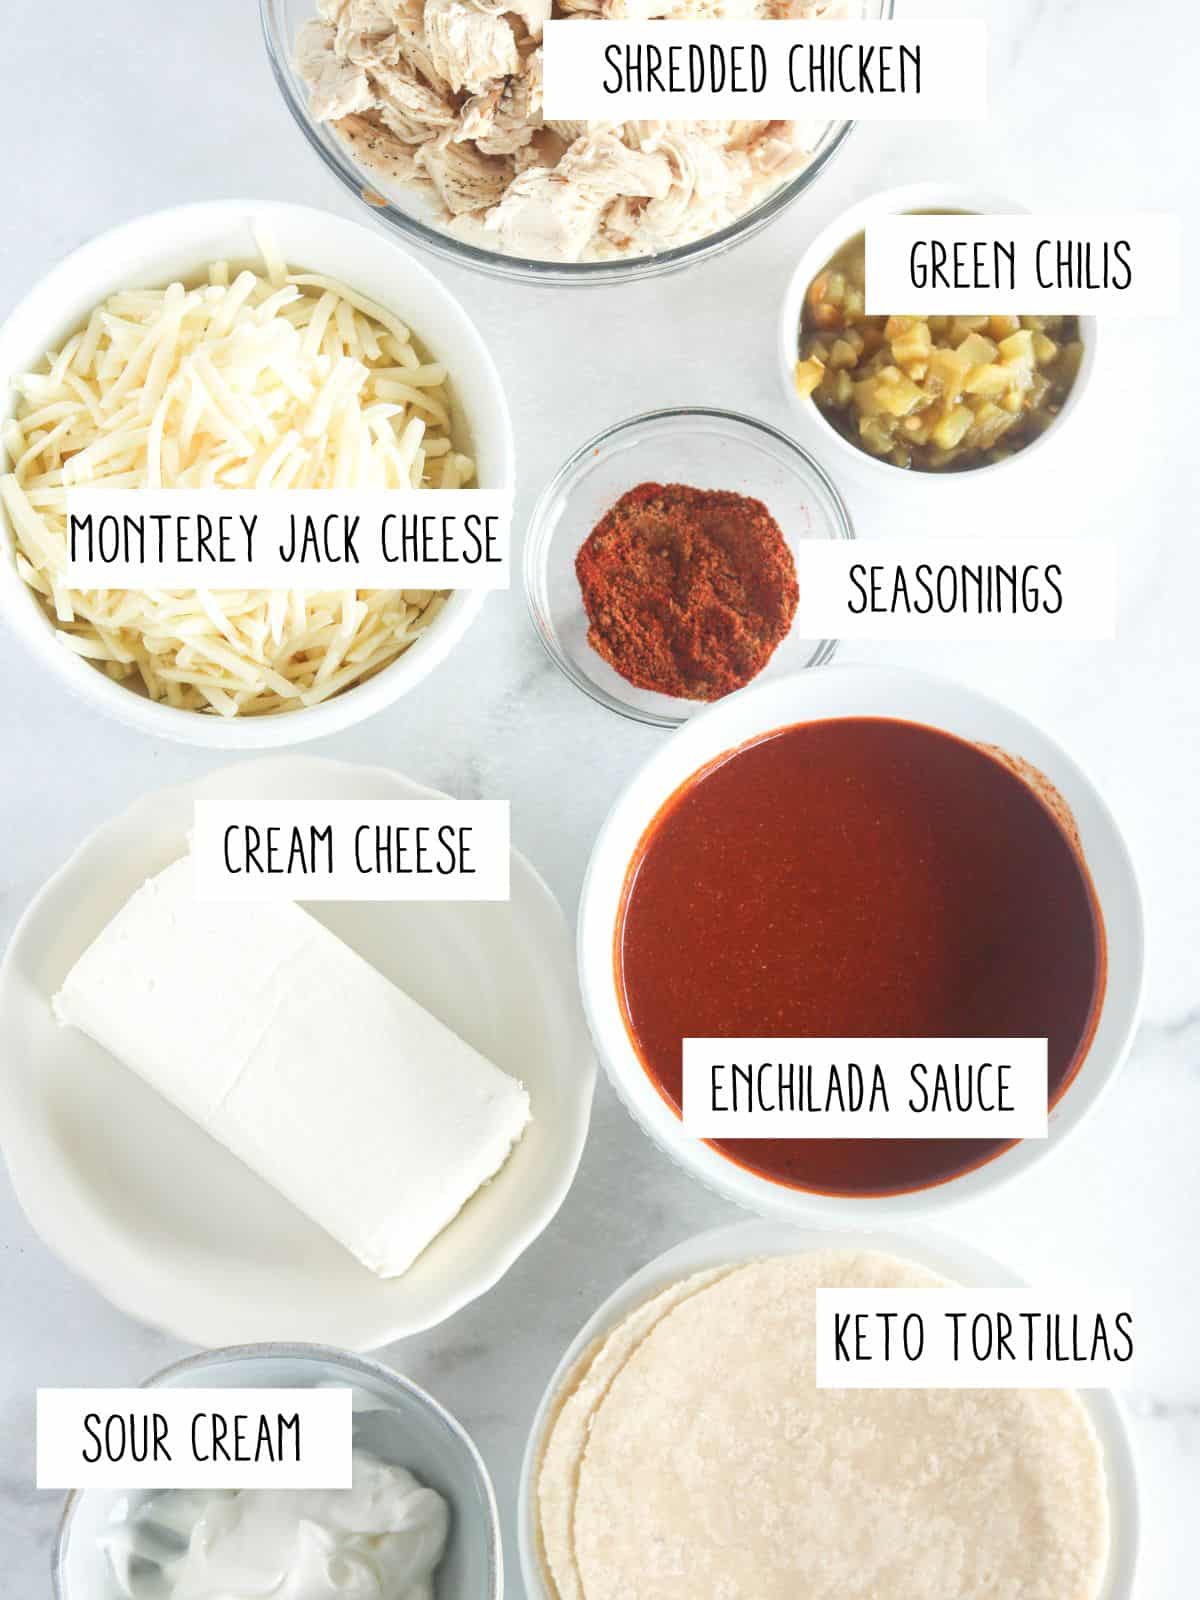 ingredients in bowls with labels.